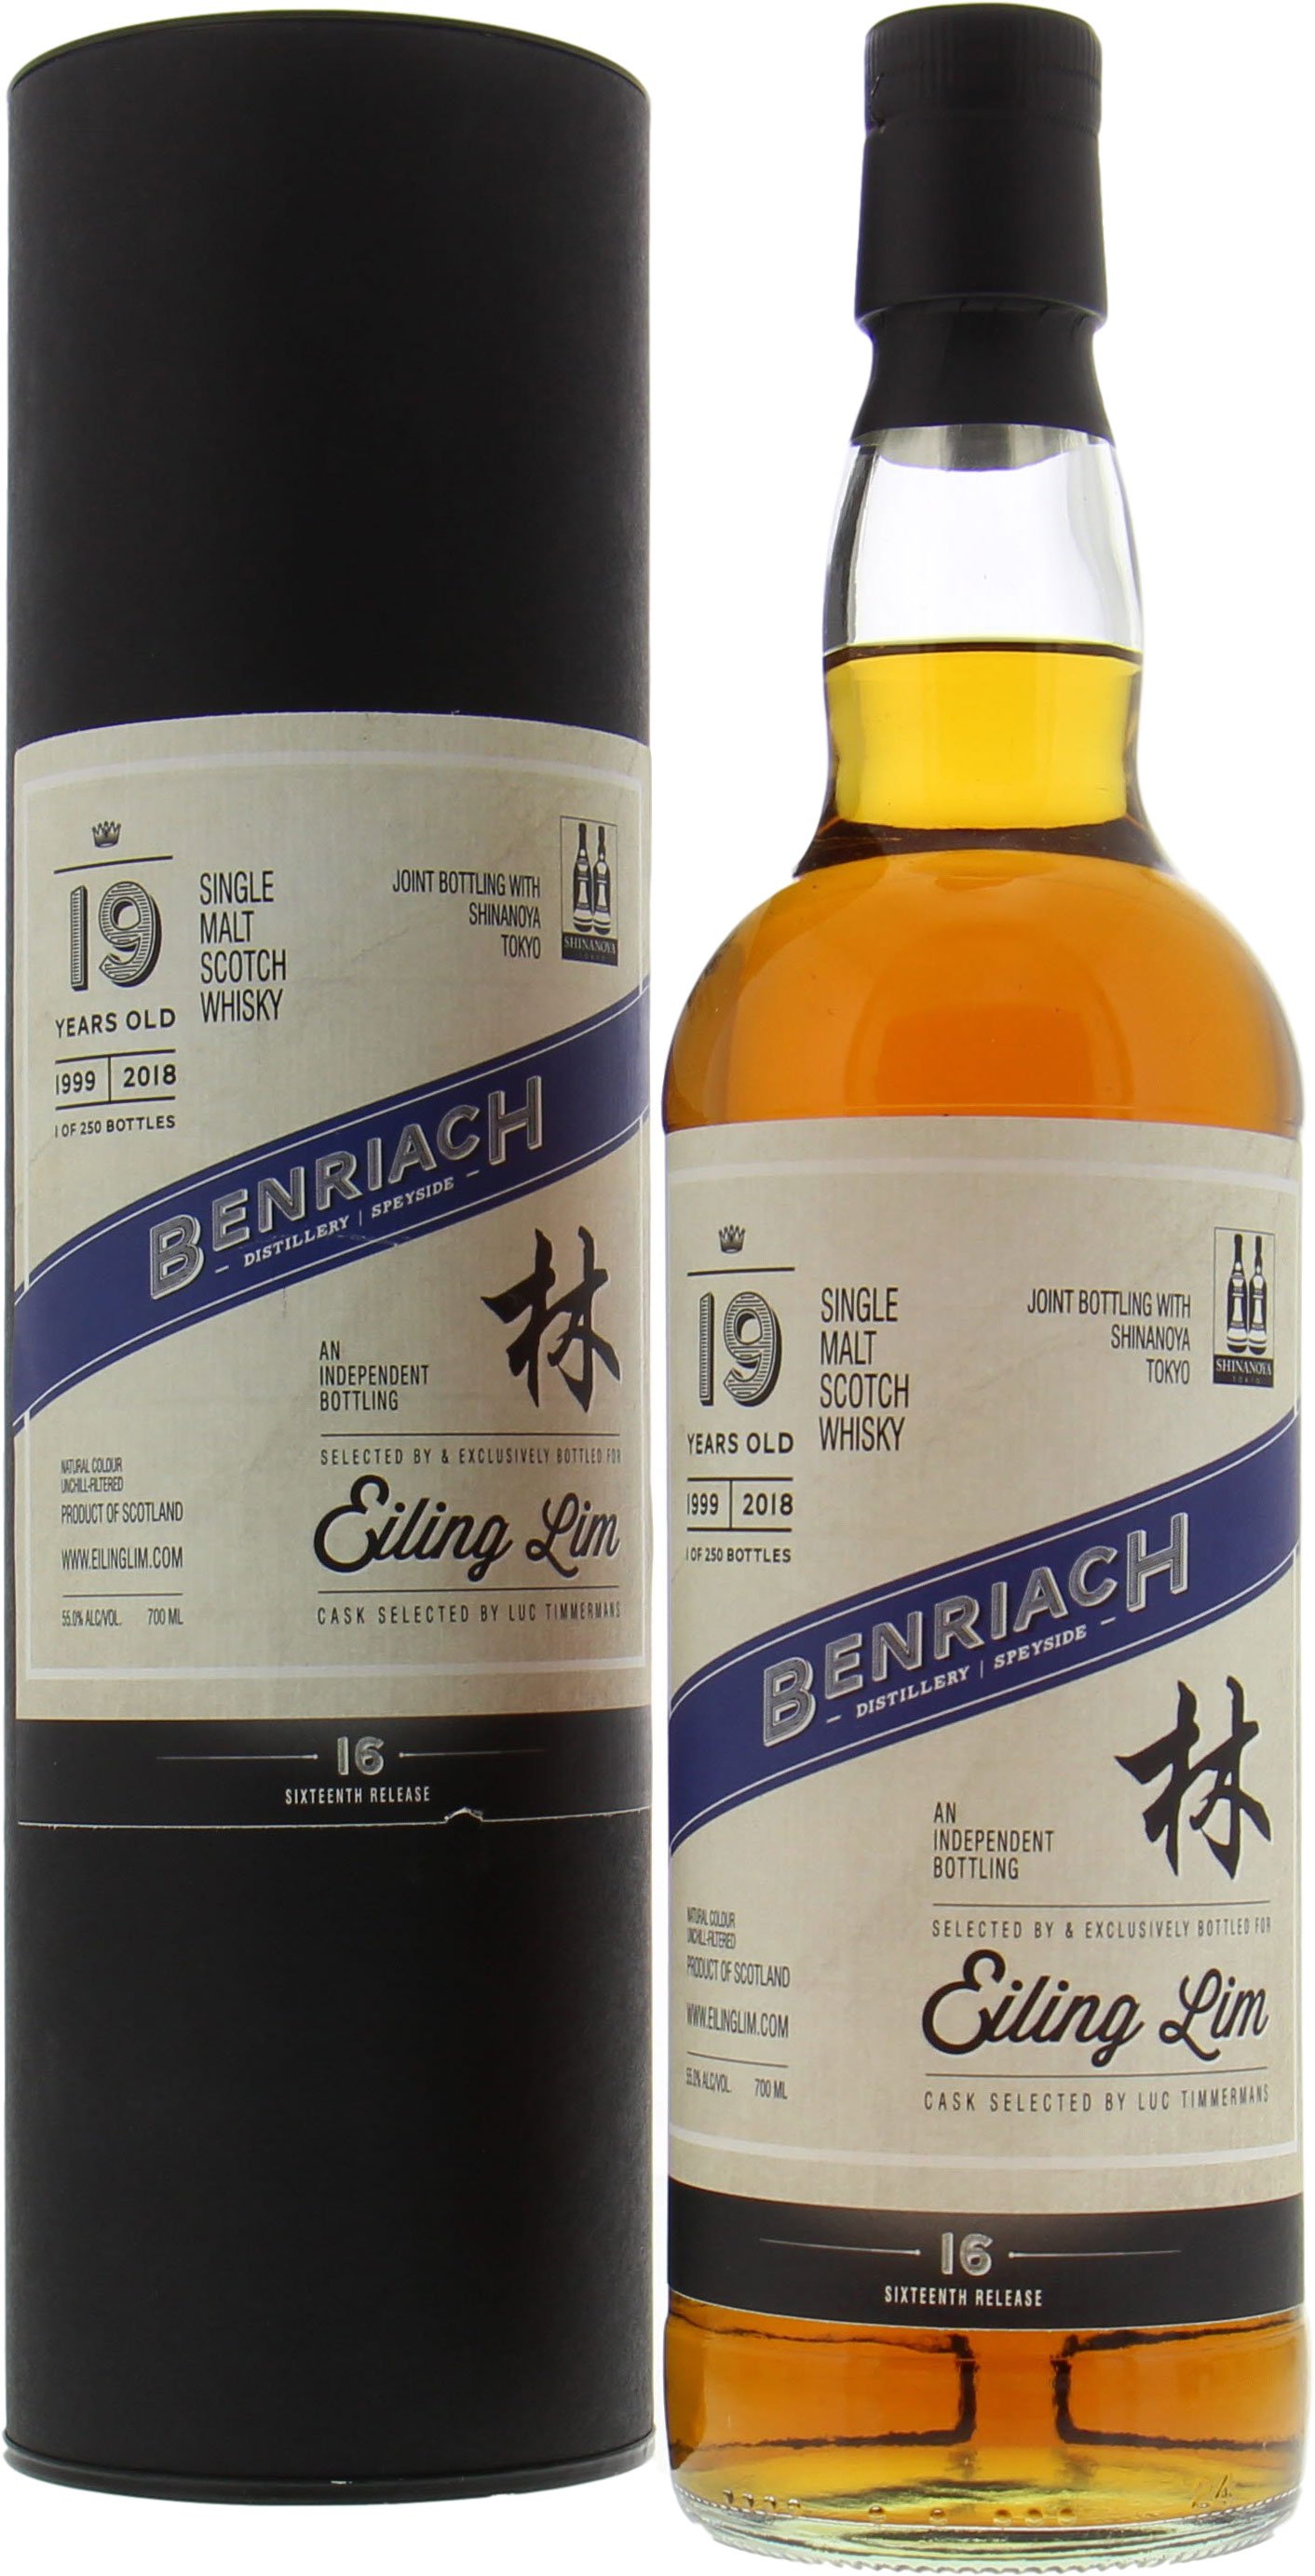 Benriach - 19 Years Old Eiling Lim 16th Release Joint Bottling Shinanoya 55% 1999